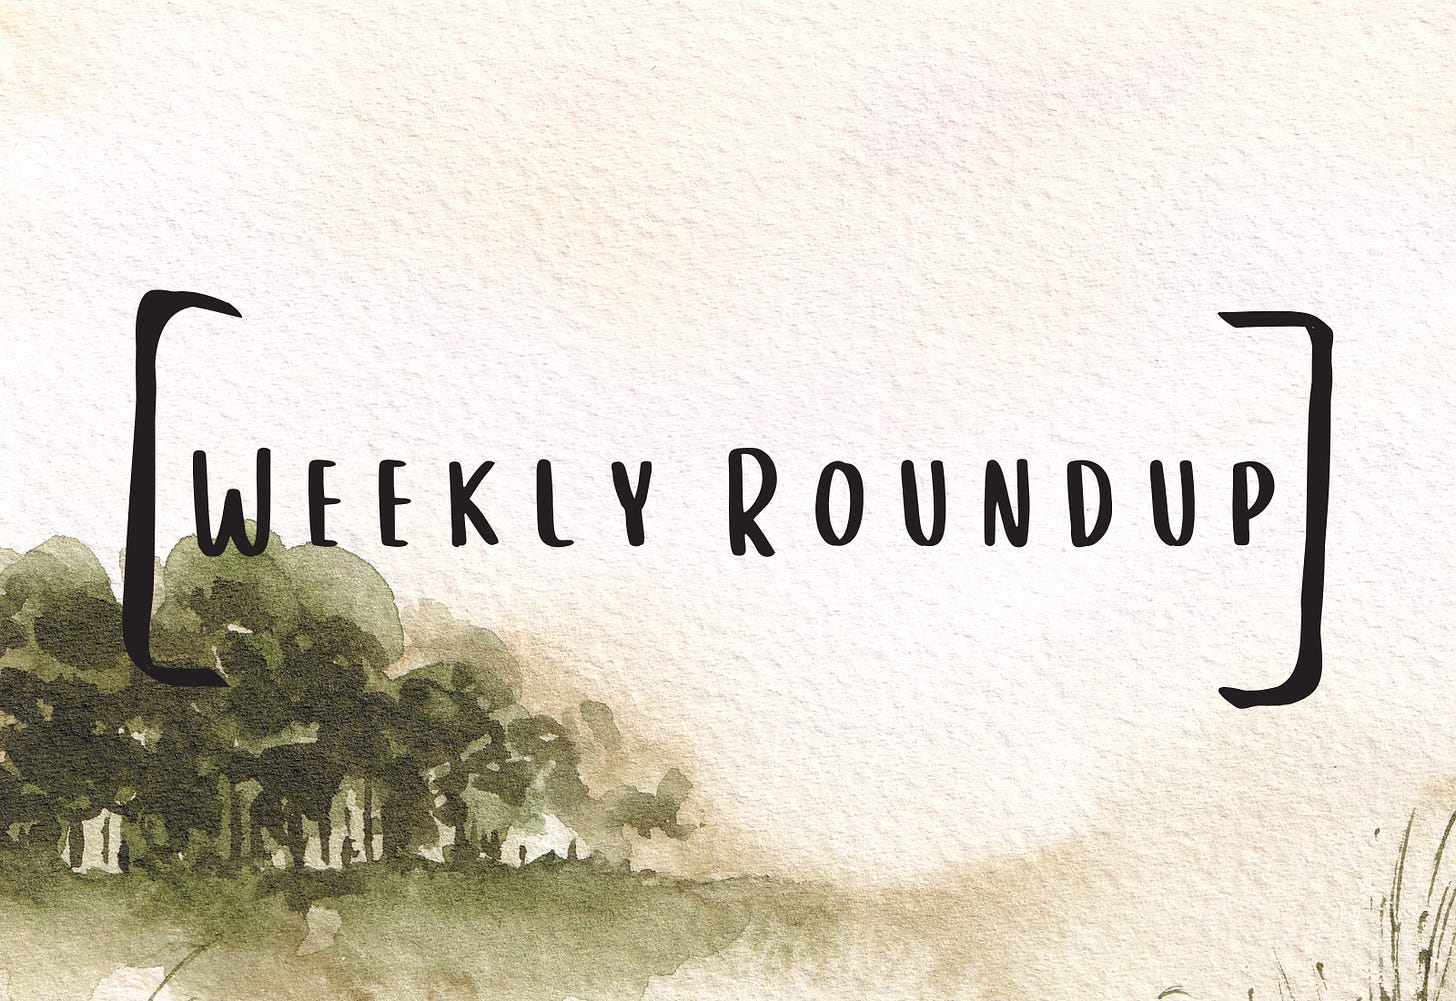 Image reads "Weekly Roundup."